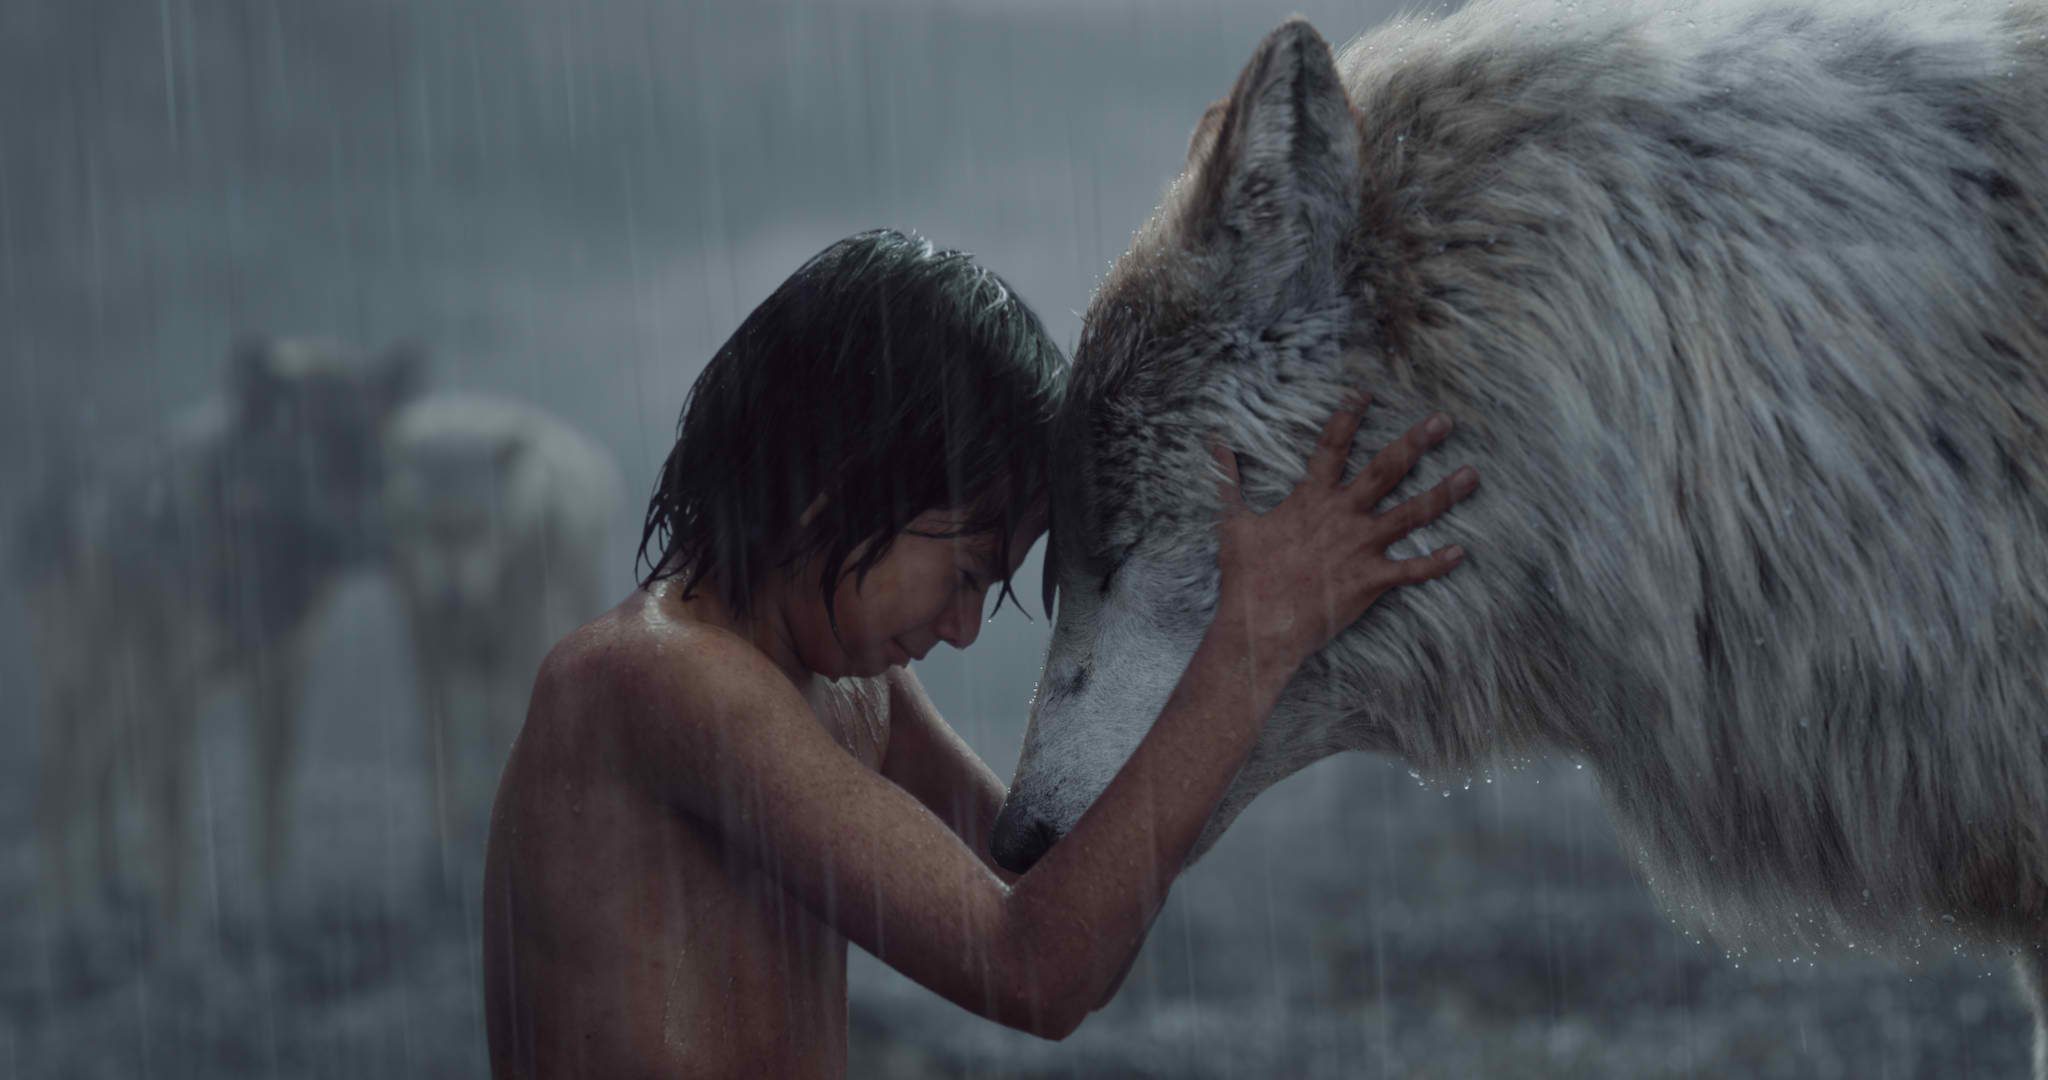 ‘The Jungle Book’ Review: More than just a fable